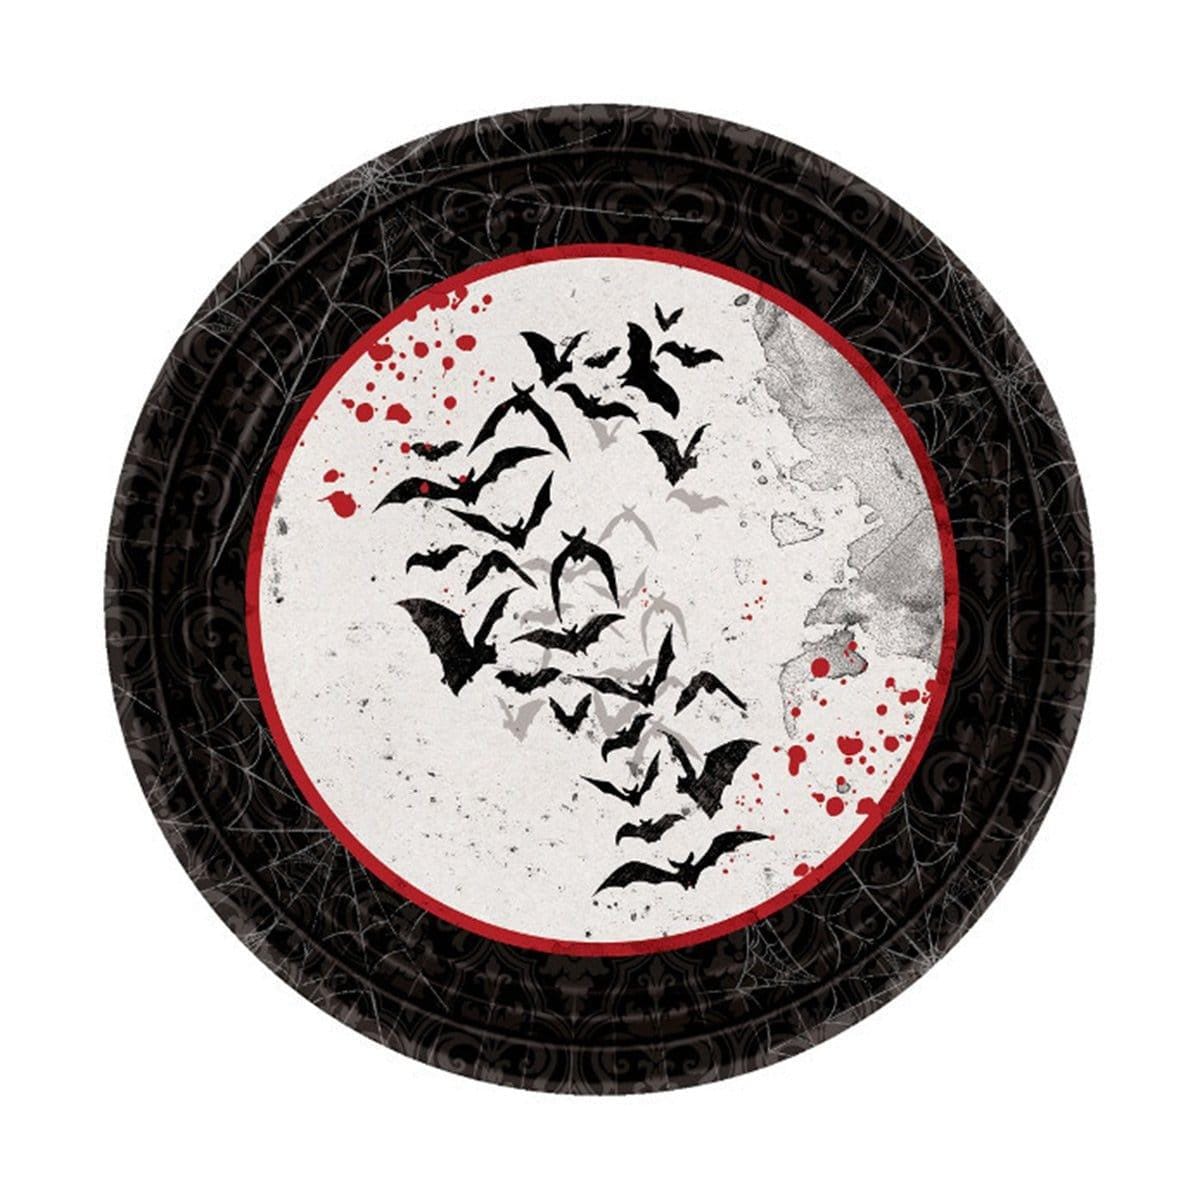 Buy Halloween Dark Manor paper plates 7 inches, 8 per package sold at Party Expert